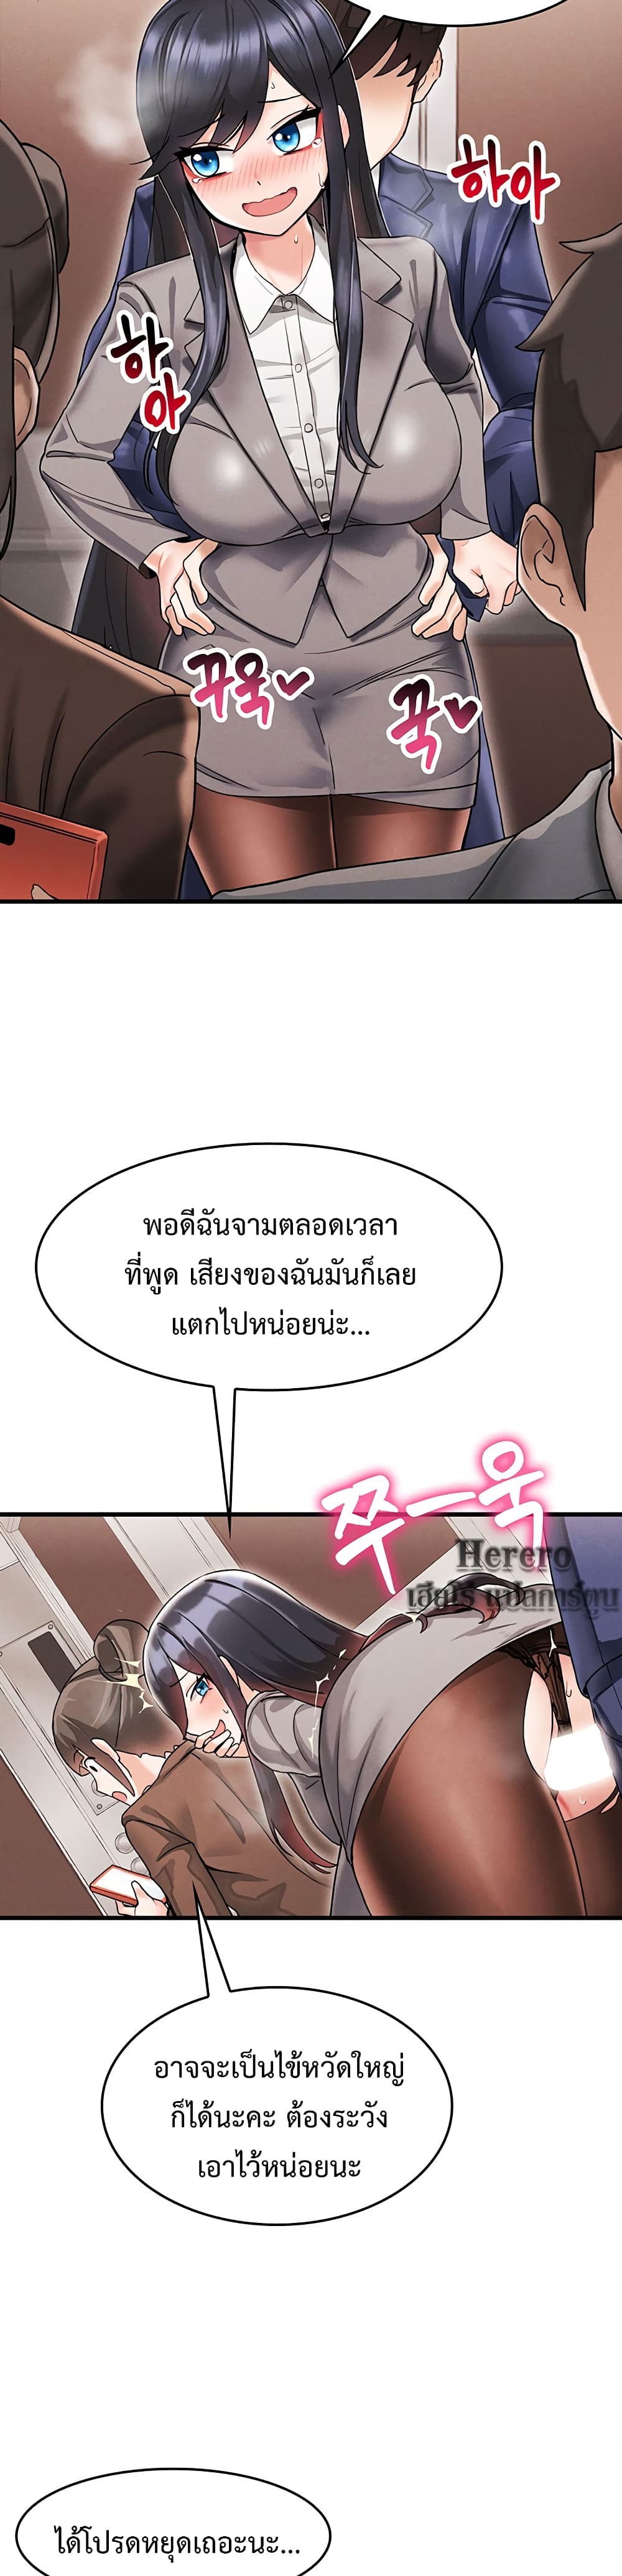 Relationship Reverse Button: Let’s Make Her Submissive 4 ภาพที่ 18